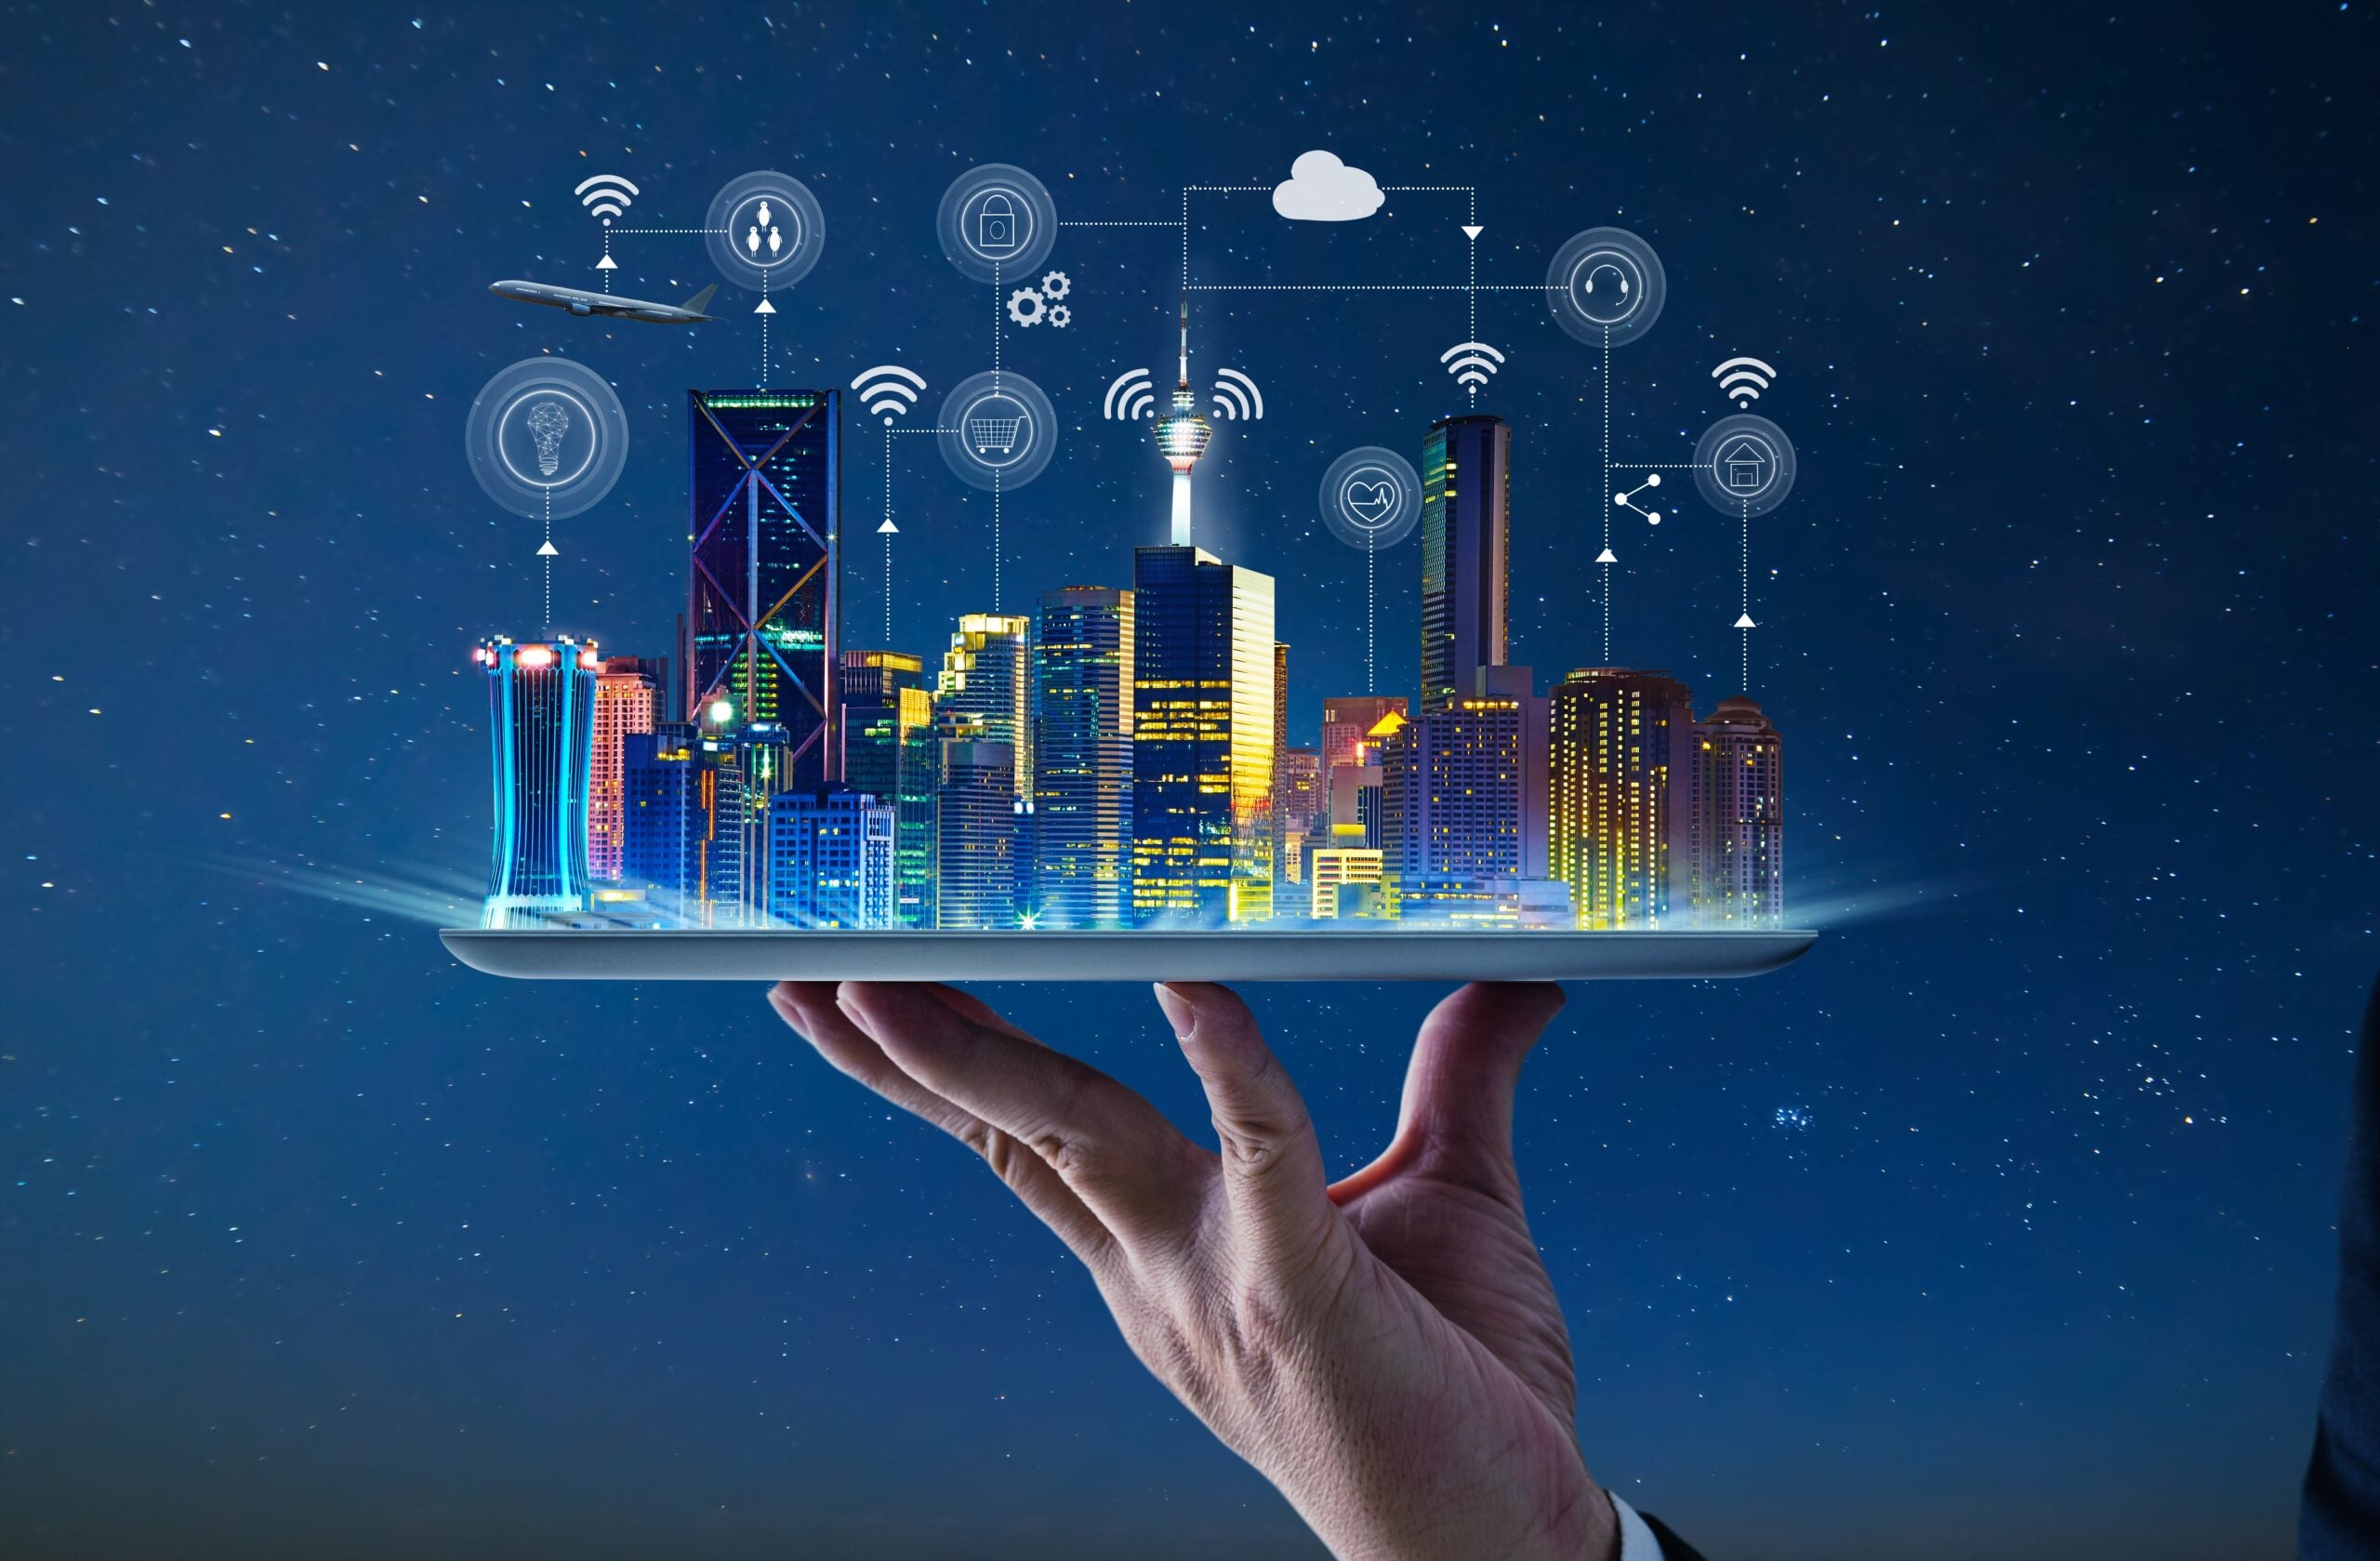 Smart cities for the many